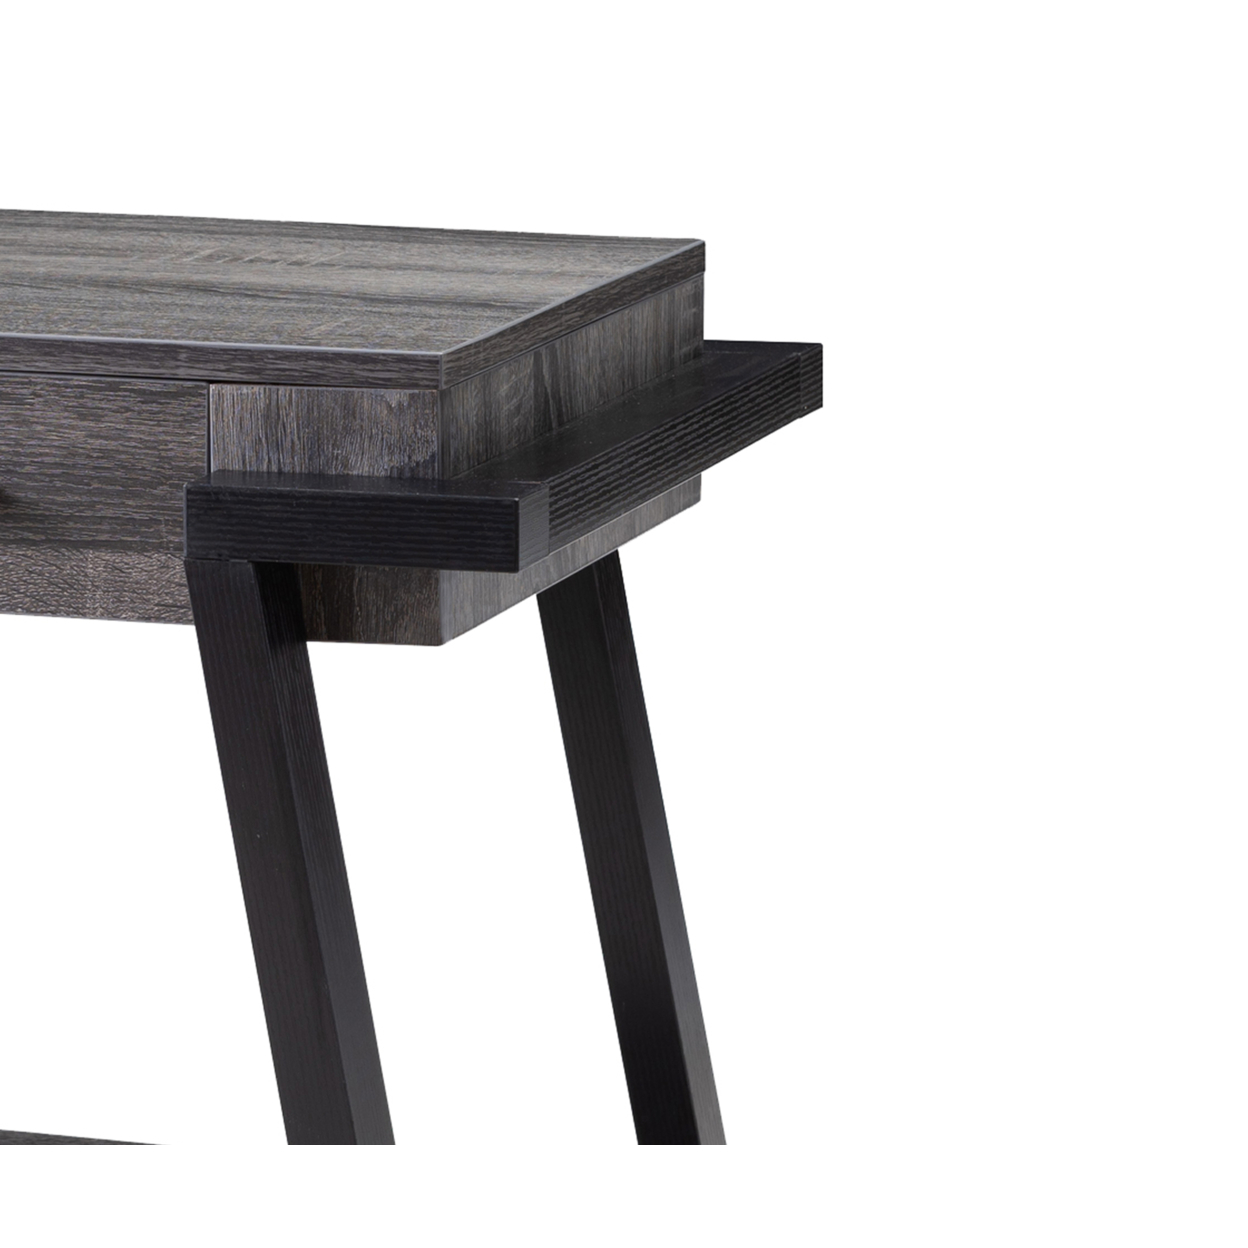 Wooden End Table With Angled Leg Support And 1 Drawer, Black And Gray- Saltoro Sherpi